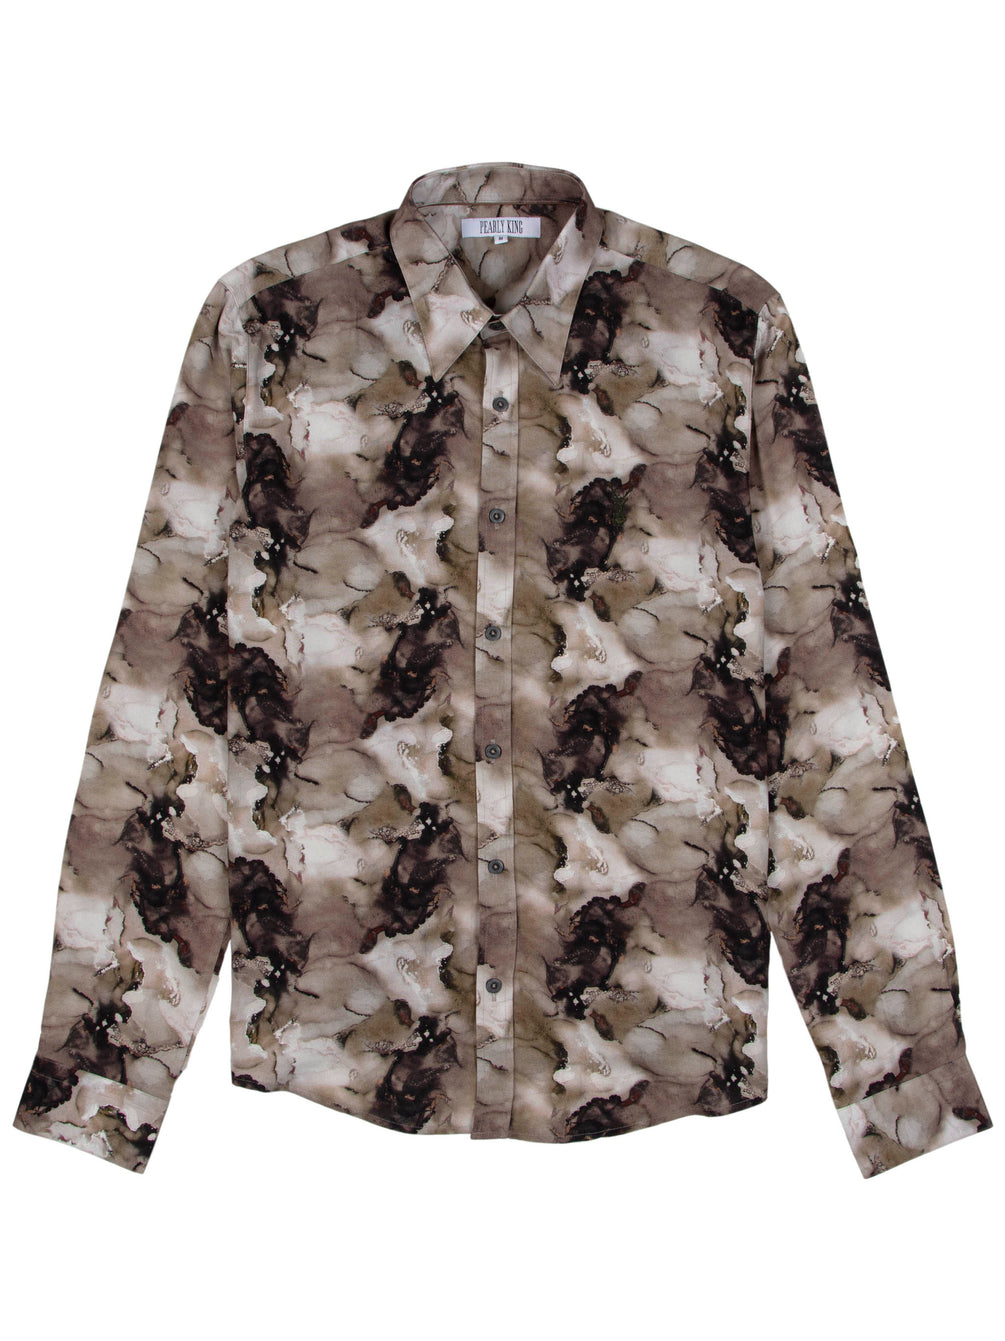 Pearly King - Prone LS Shirt - Marbled Green